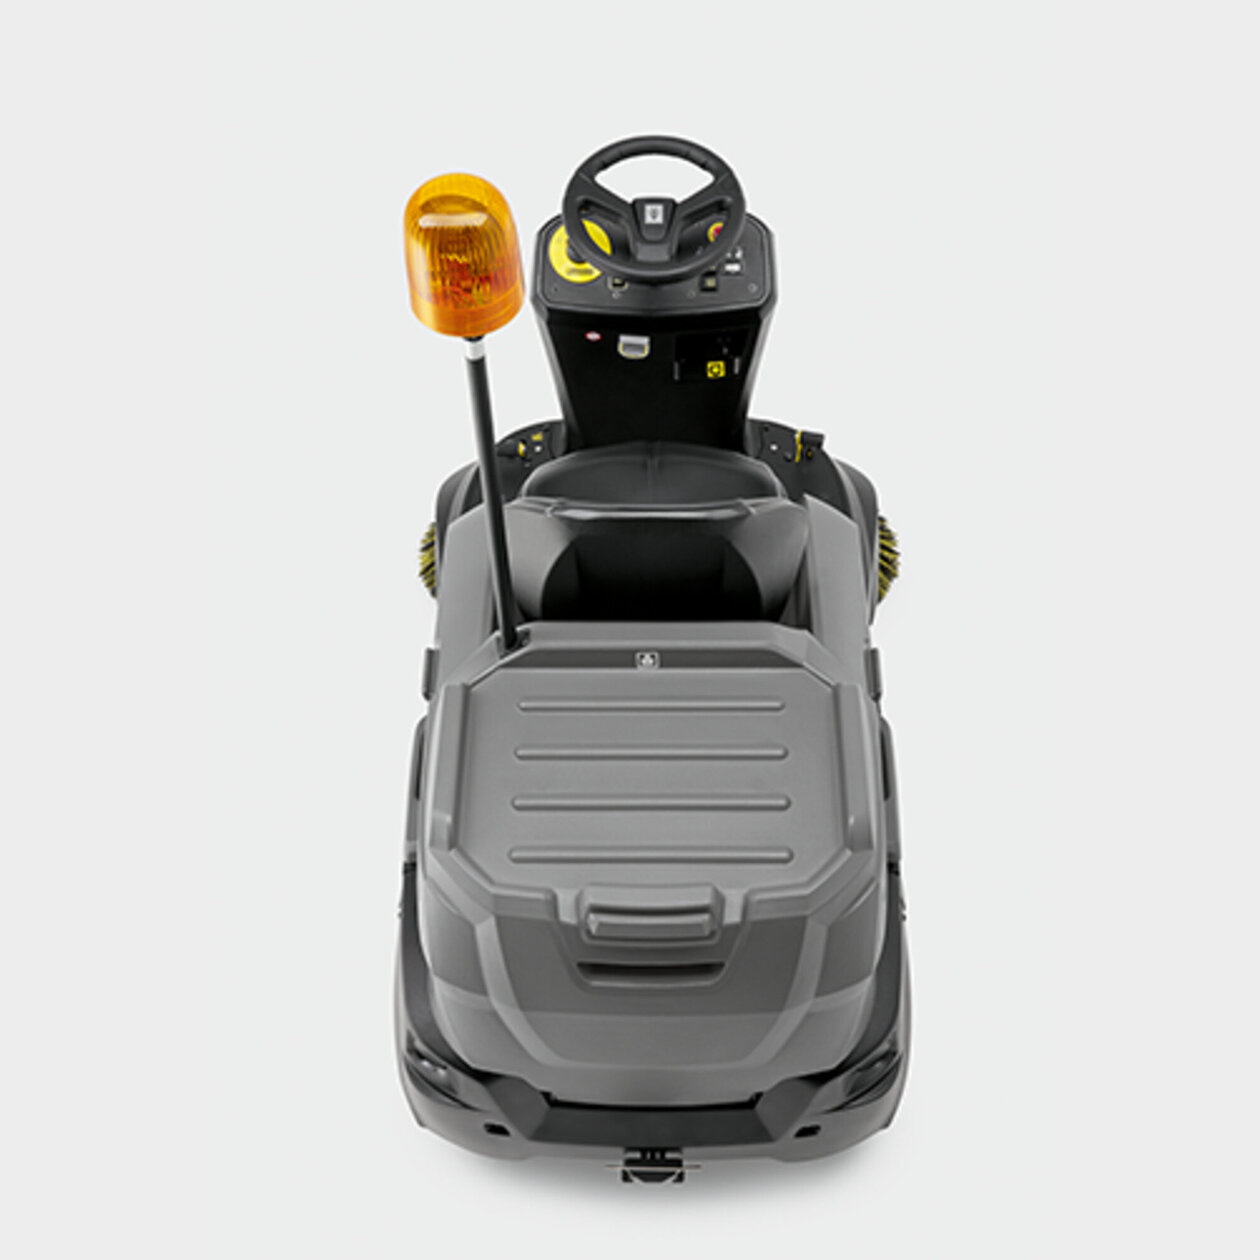 Vacuum sweeper KM 90/60 R P Advanced: Robust, compact design with pick-up area